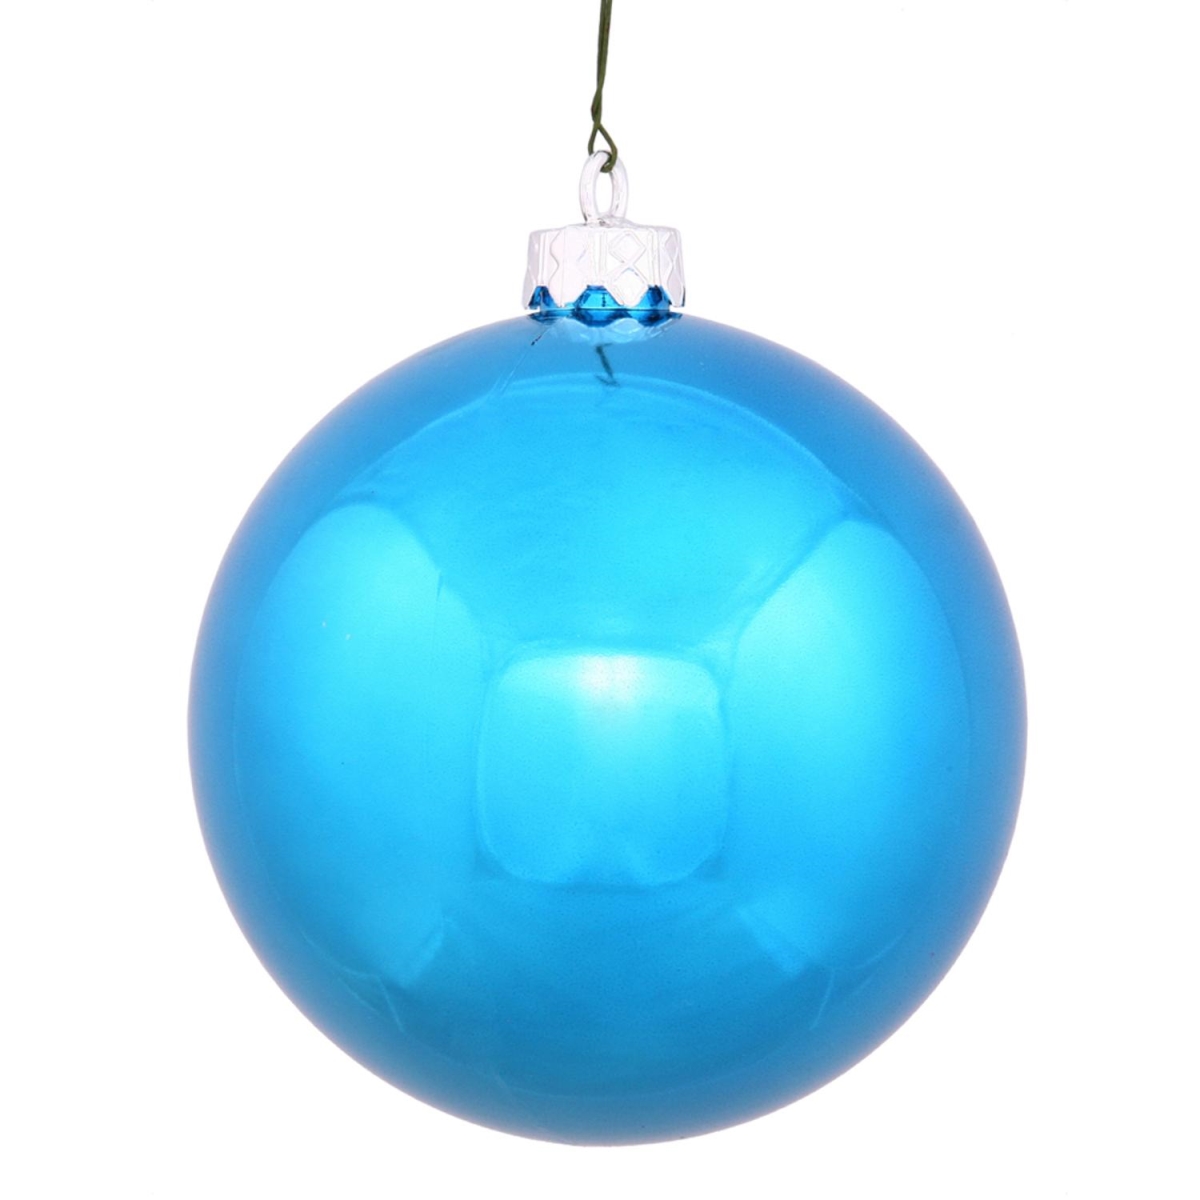 31749083 Shiny Turquoise Uv Resistant Commercial Drilled Shatterproof Christmas Ball Ornament - 2.75 In.